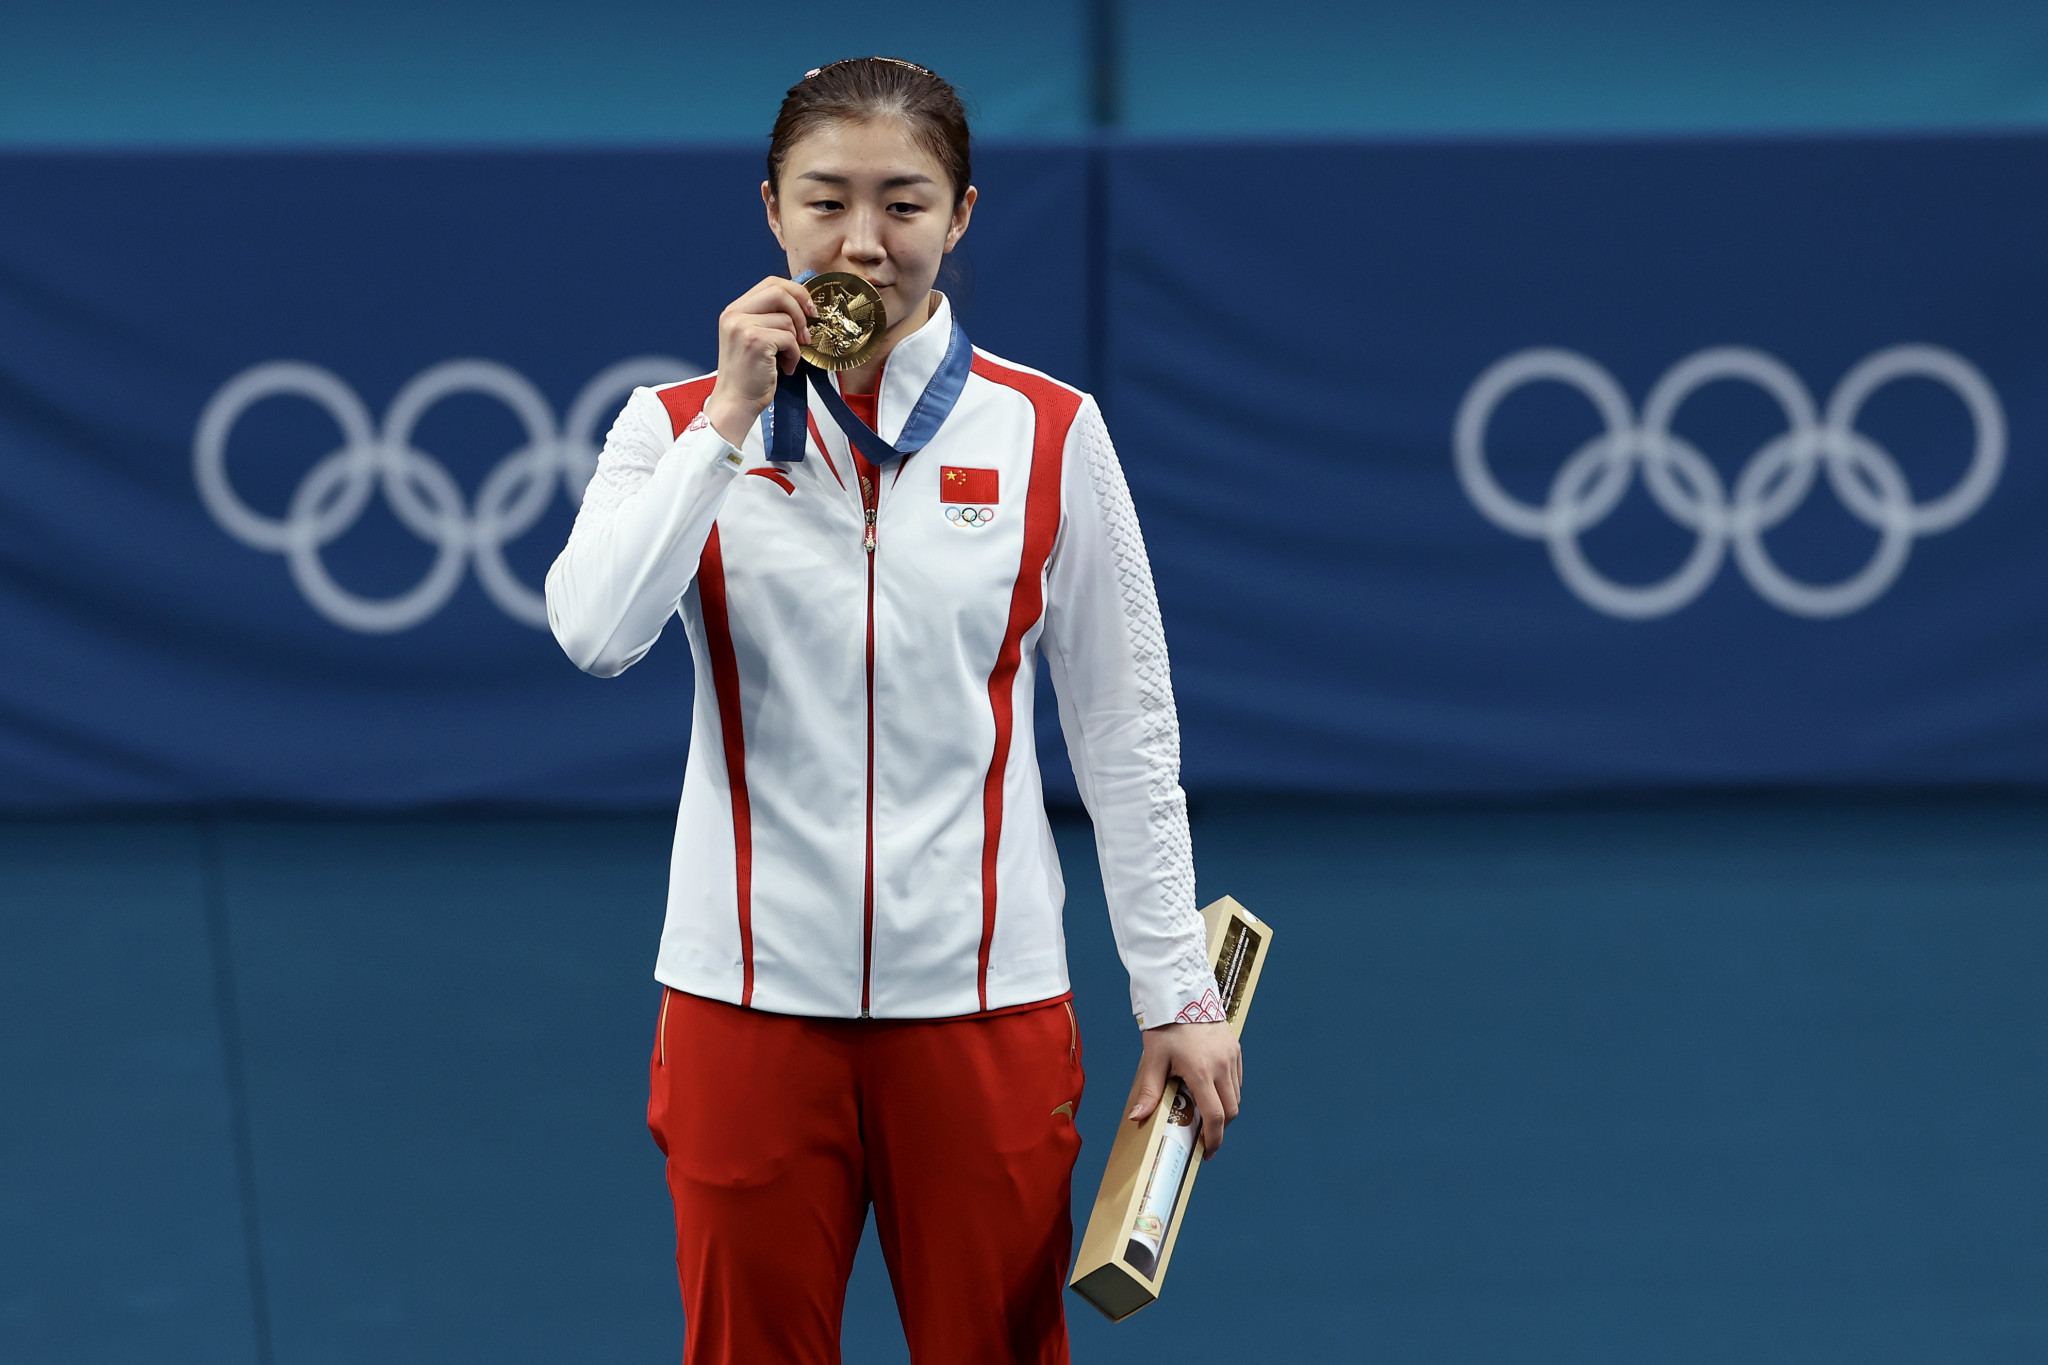 China's Meng got her hands in gold in the women's table tennis singles. GETTY IMAGES